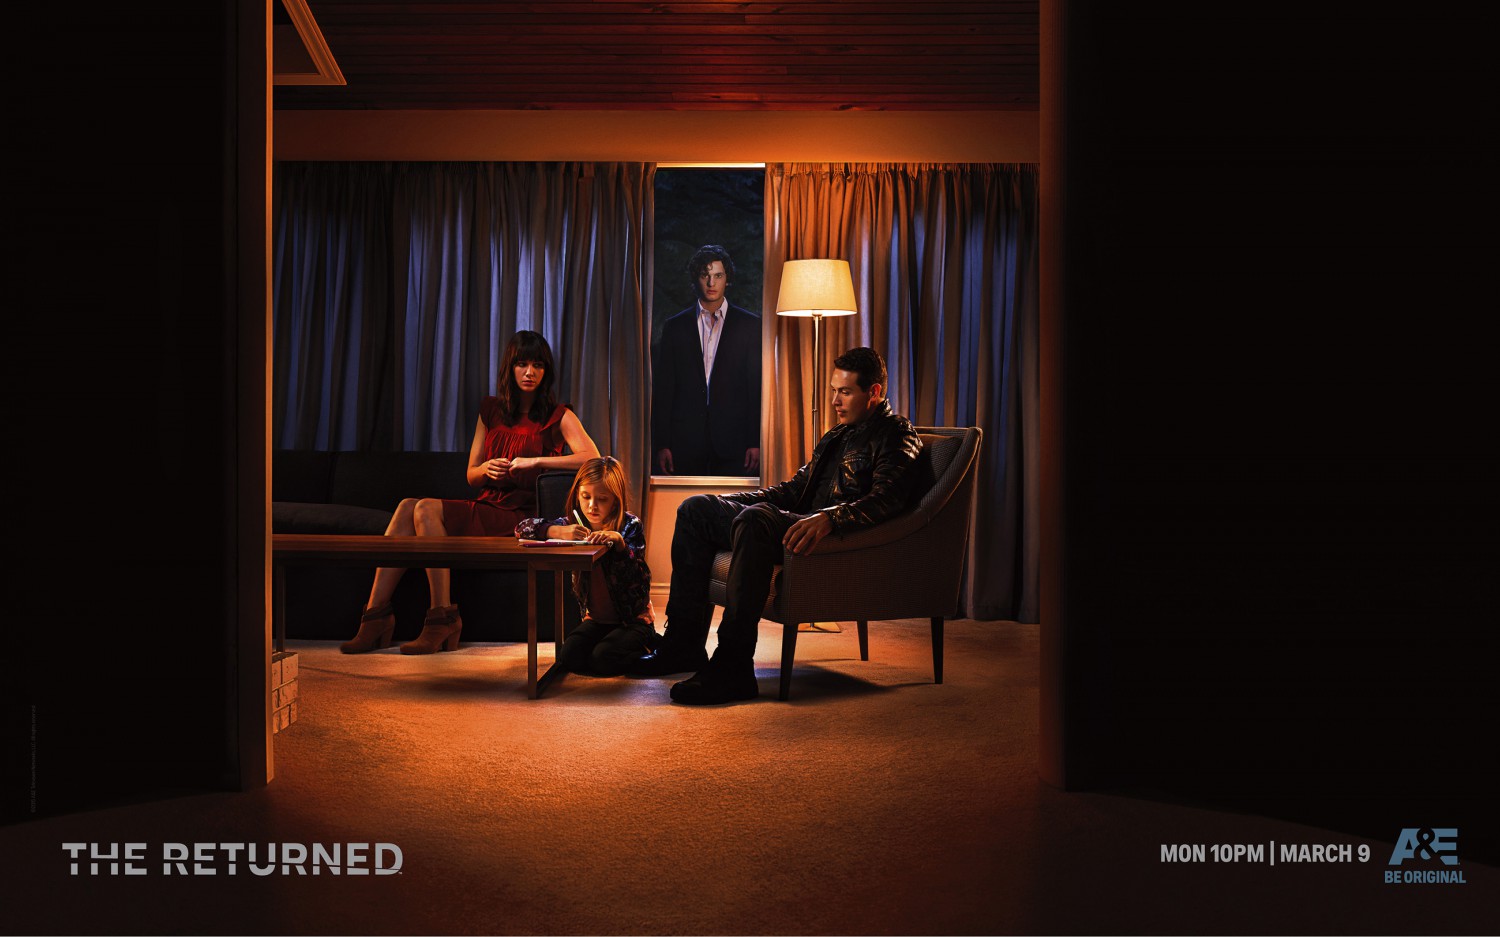 Extra Large TV Poster Image for The Returned (#5 of 8)